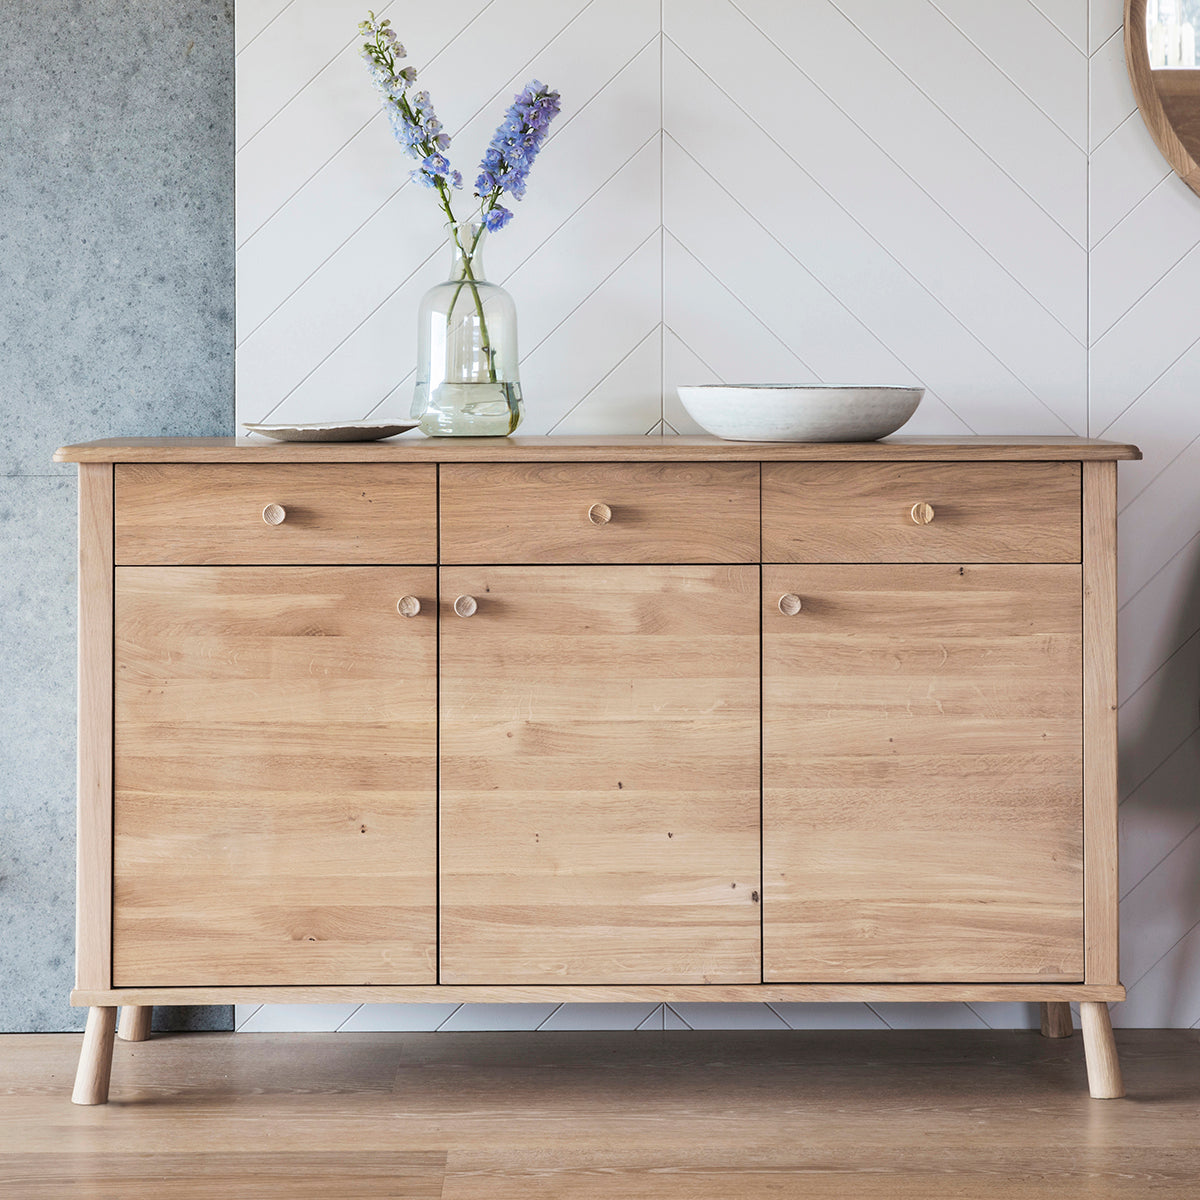 A Tigley 3 Door 3 Drawer Sideboard 1400x475x850mm from kikiathome.co.uk, perfect for interior decor and home furniture.